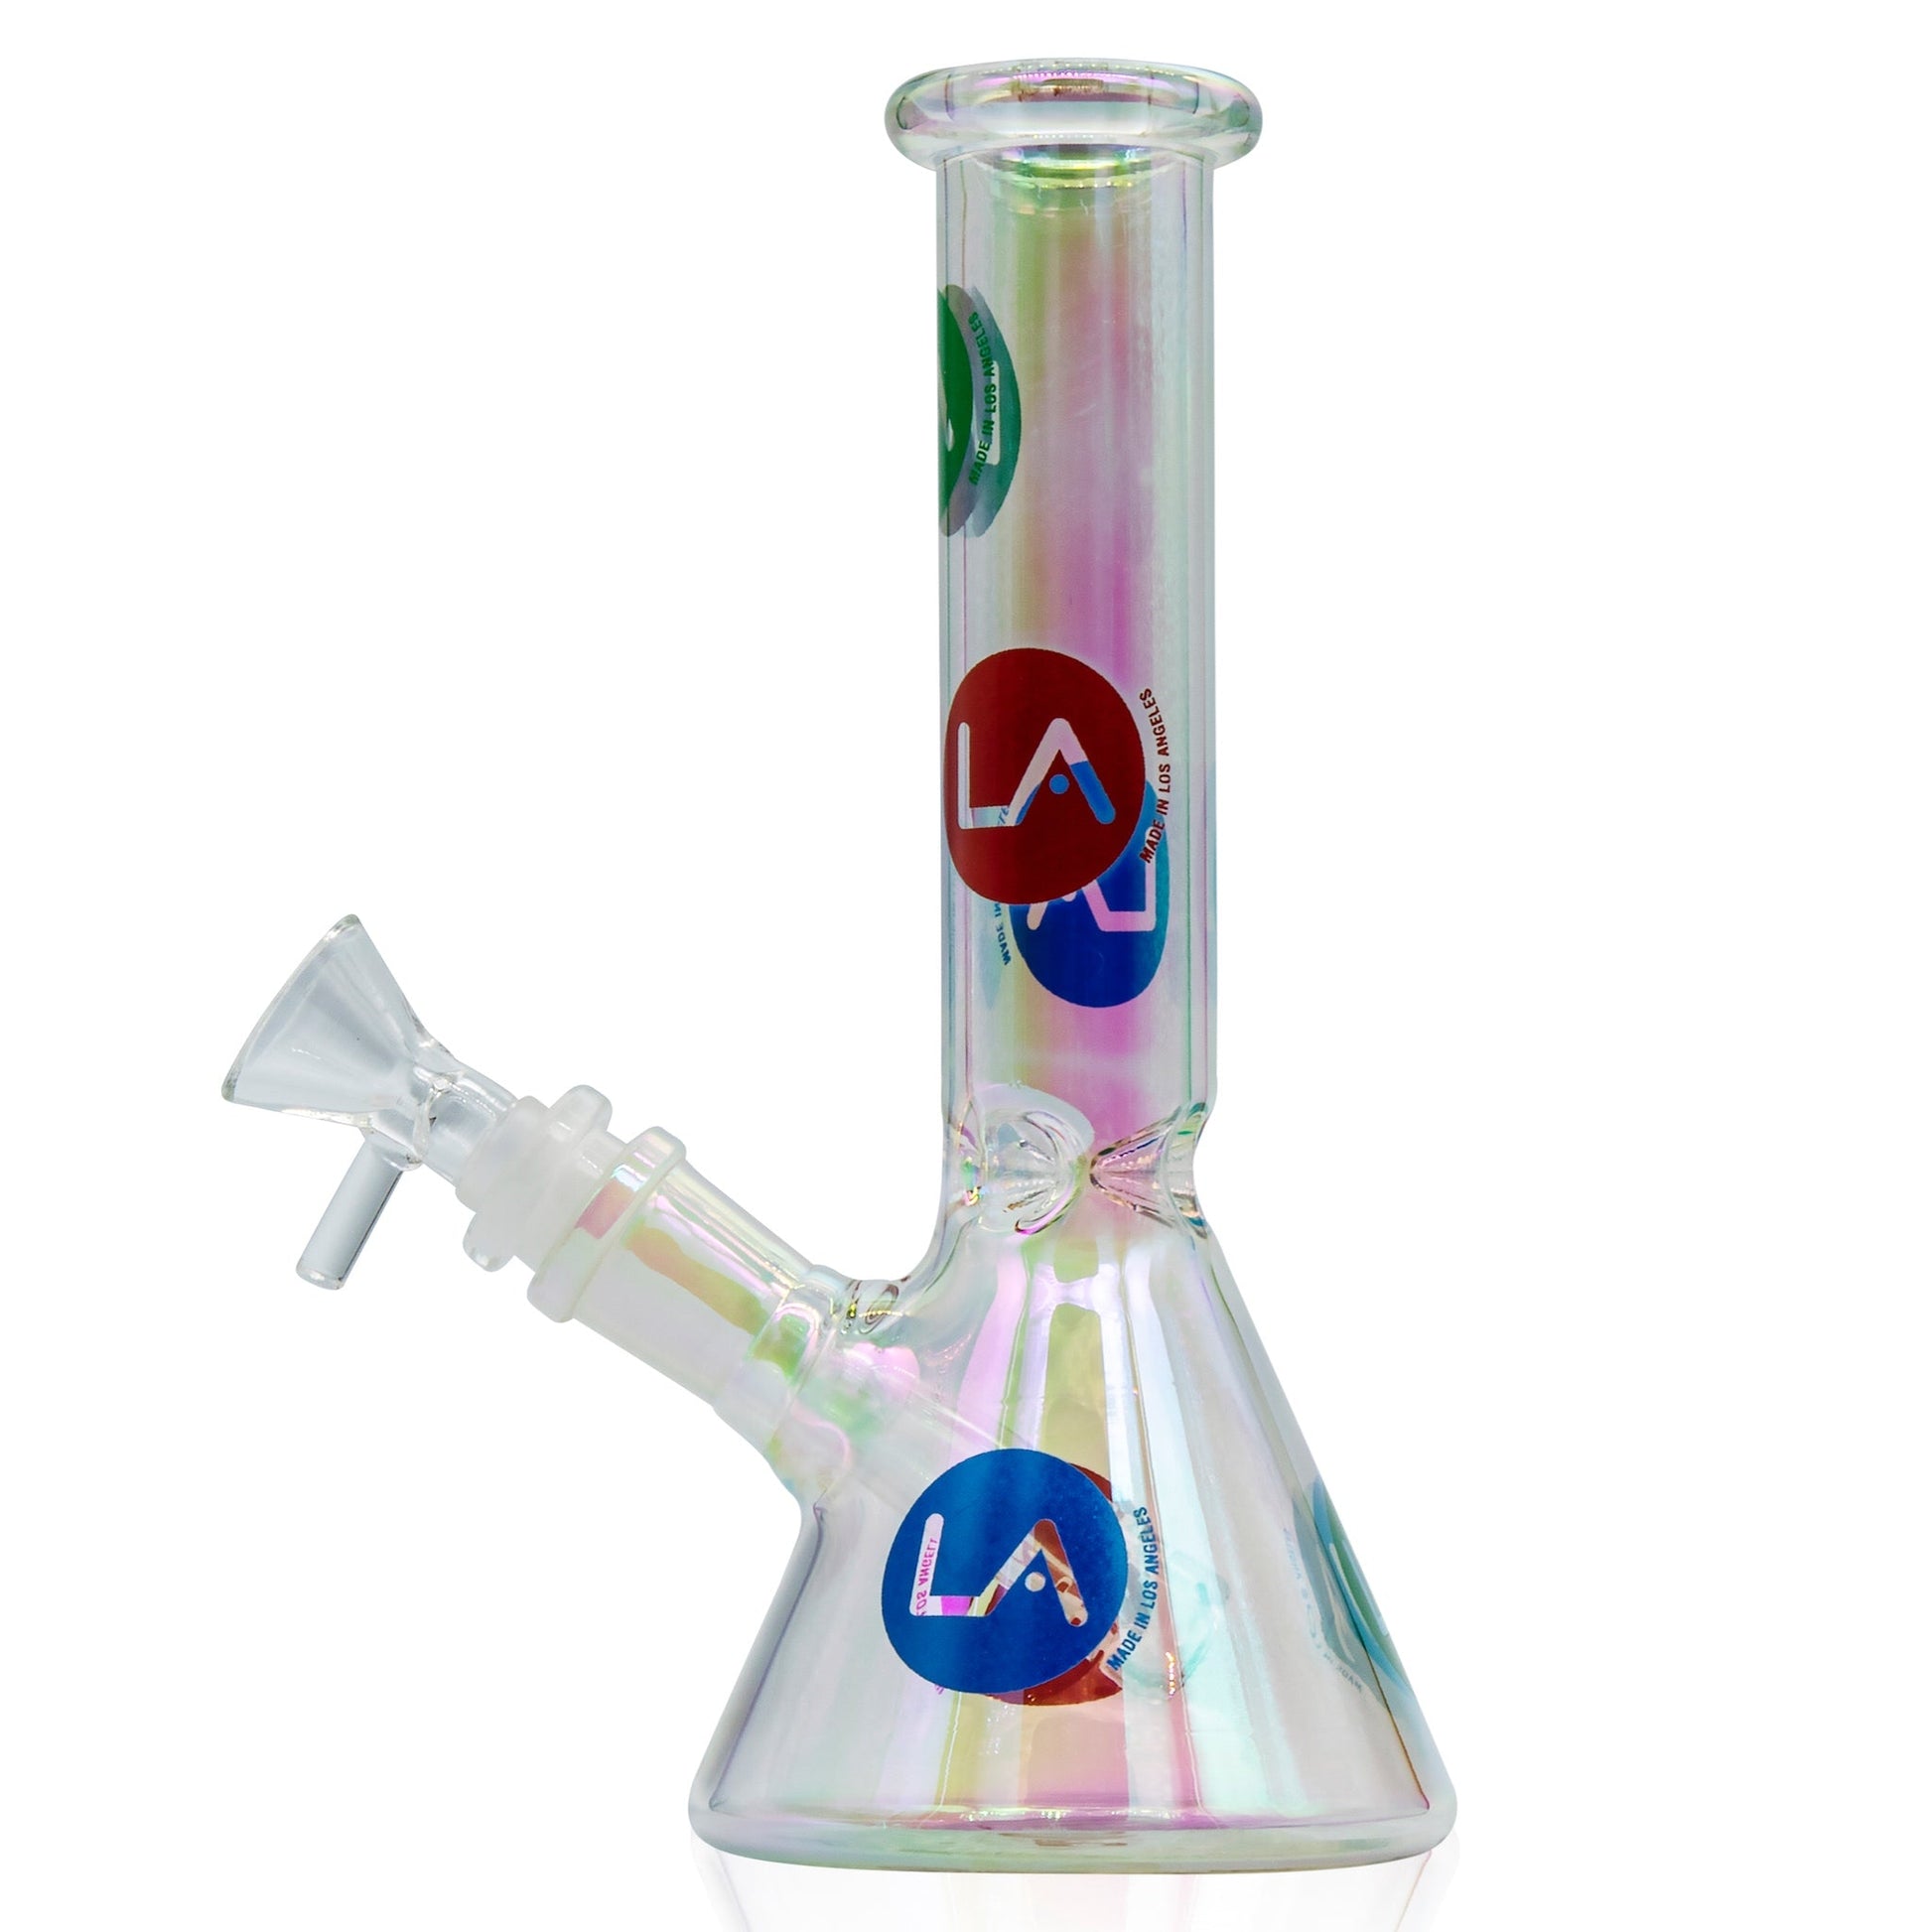 LA Pipes 9” Champagne Disco Beaker Bong 🌿 by LA Pipes | Mission Dispensary